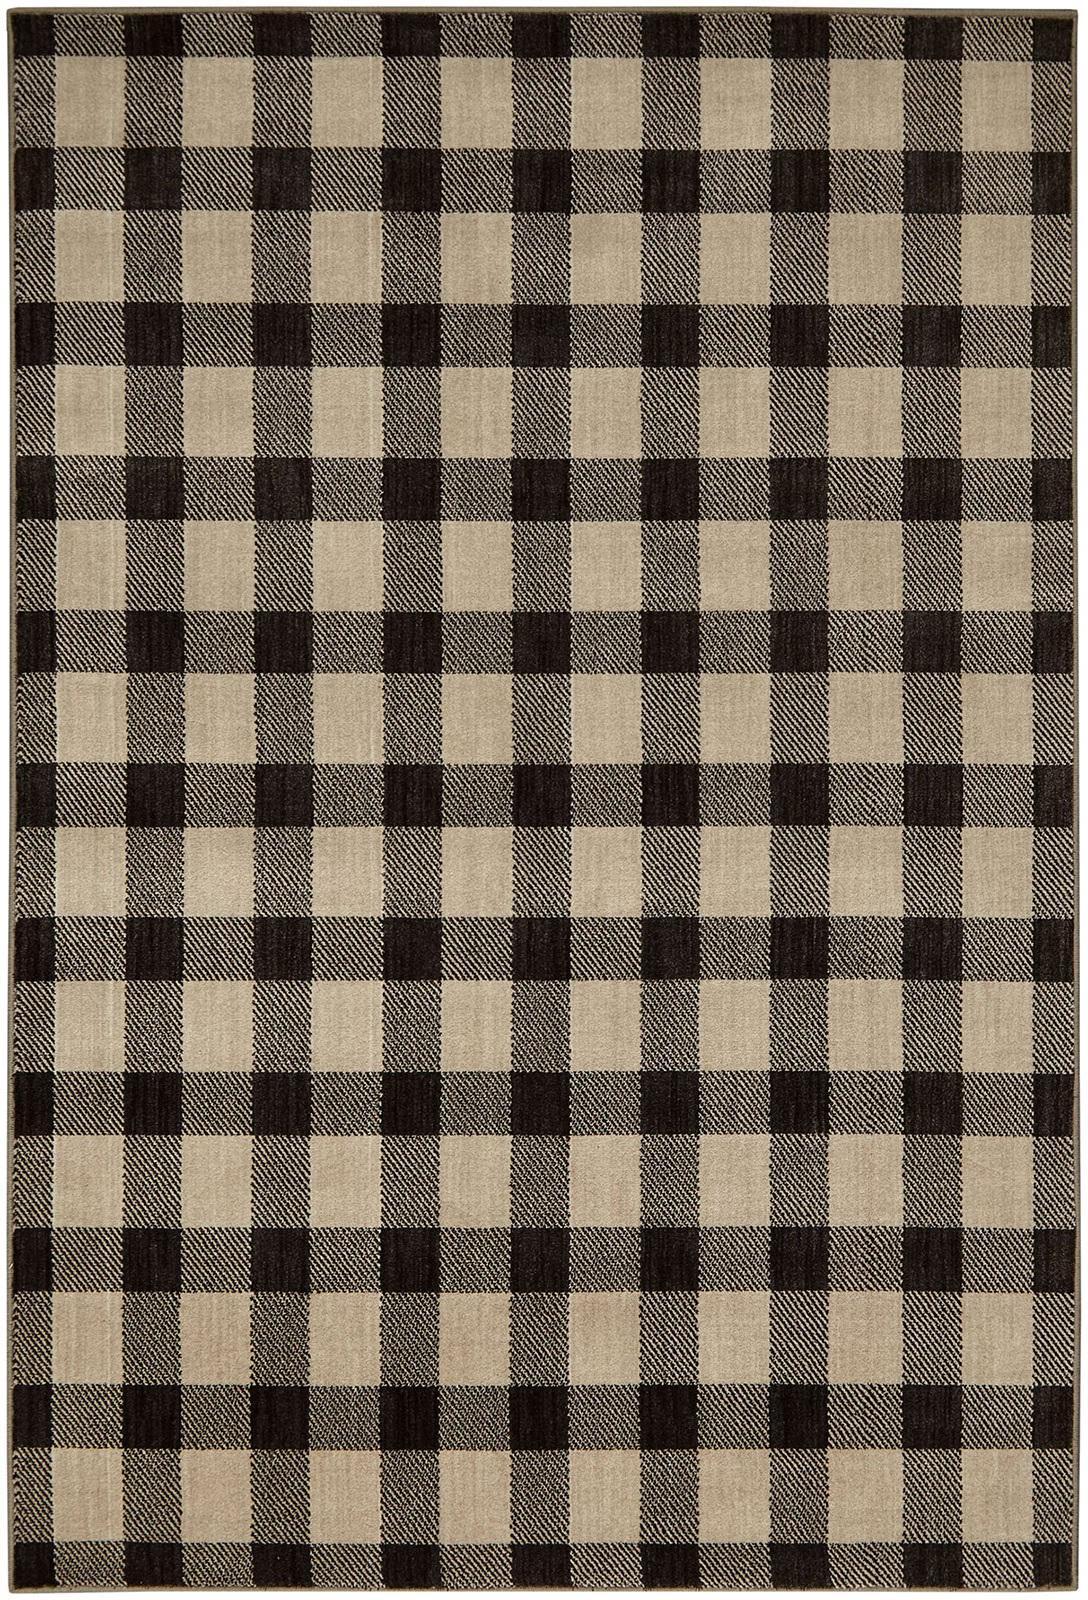 Contemporary Area Rug RG8185-S Kendrick RG8185-S in Onyx 